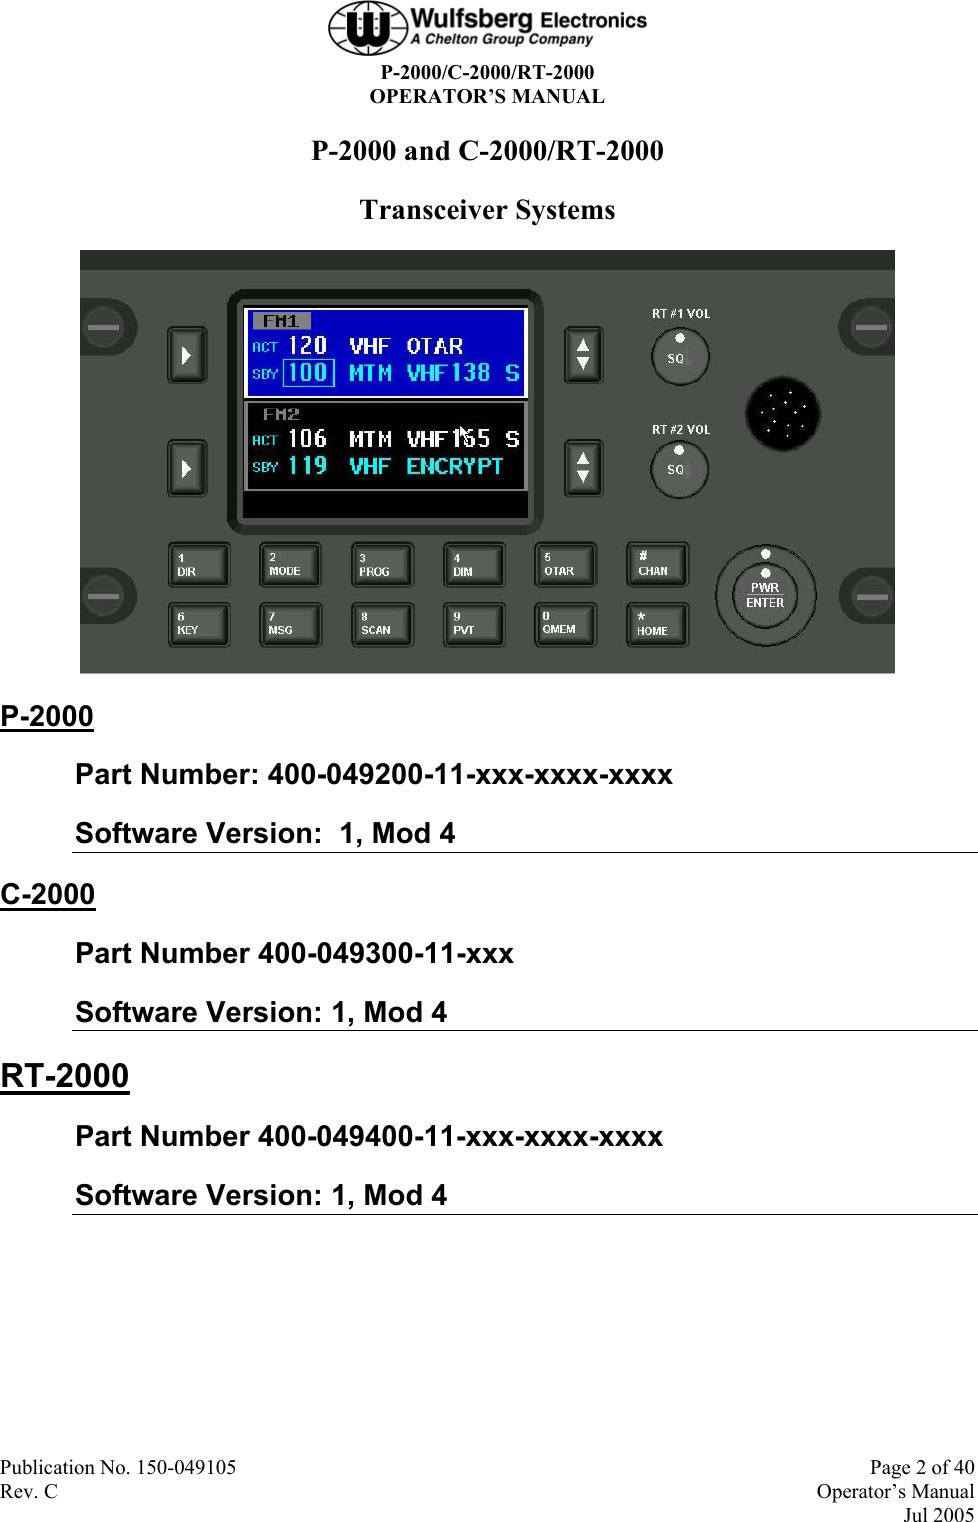  P-2000/C-2000/RT-2000 OPERATOR’S MANUAL Publication No. 150-049105   Page 2 of 40 Rev. C   Operator’s Manual  Jul 2005 P-2000 and C-2000/RT-2000 Transceiver Systems  P-2000 Part Number: 400-049200-11-xxx-xxxx-xxxx Software Version:  1, Mod 4 C-2000 Part Number 400-049300-11-xxx Software Version: 1, Mod 4 RT-2000 Part Number 400-049400-11-xxx-xxxx-xxxx Software Version: 1, Mod 4  